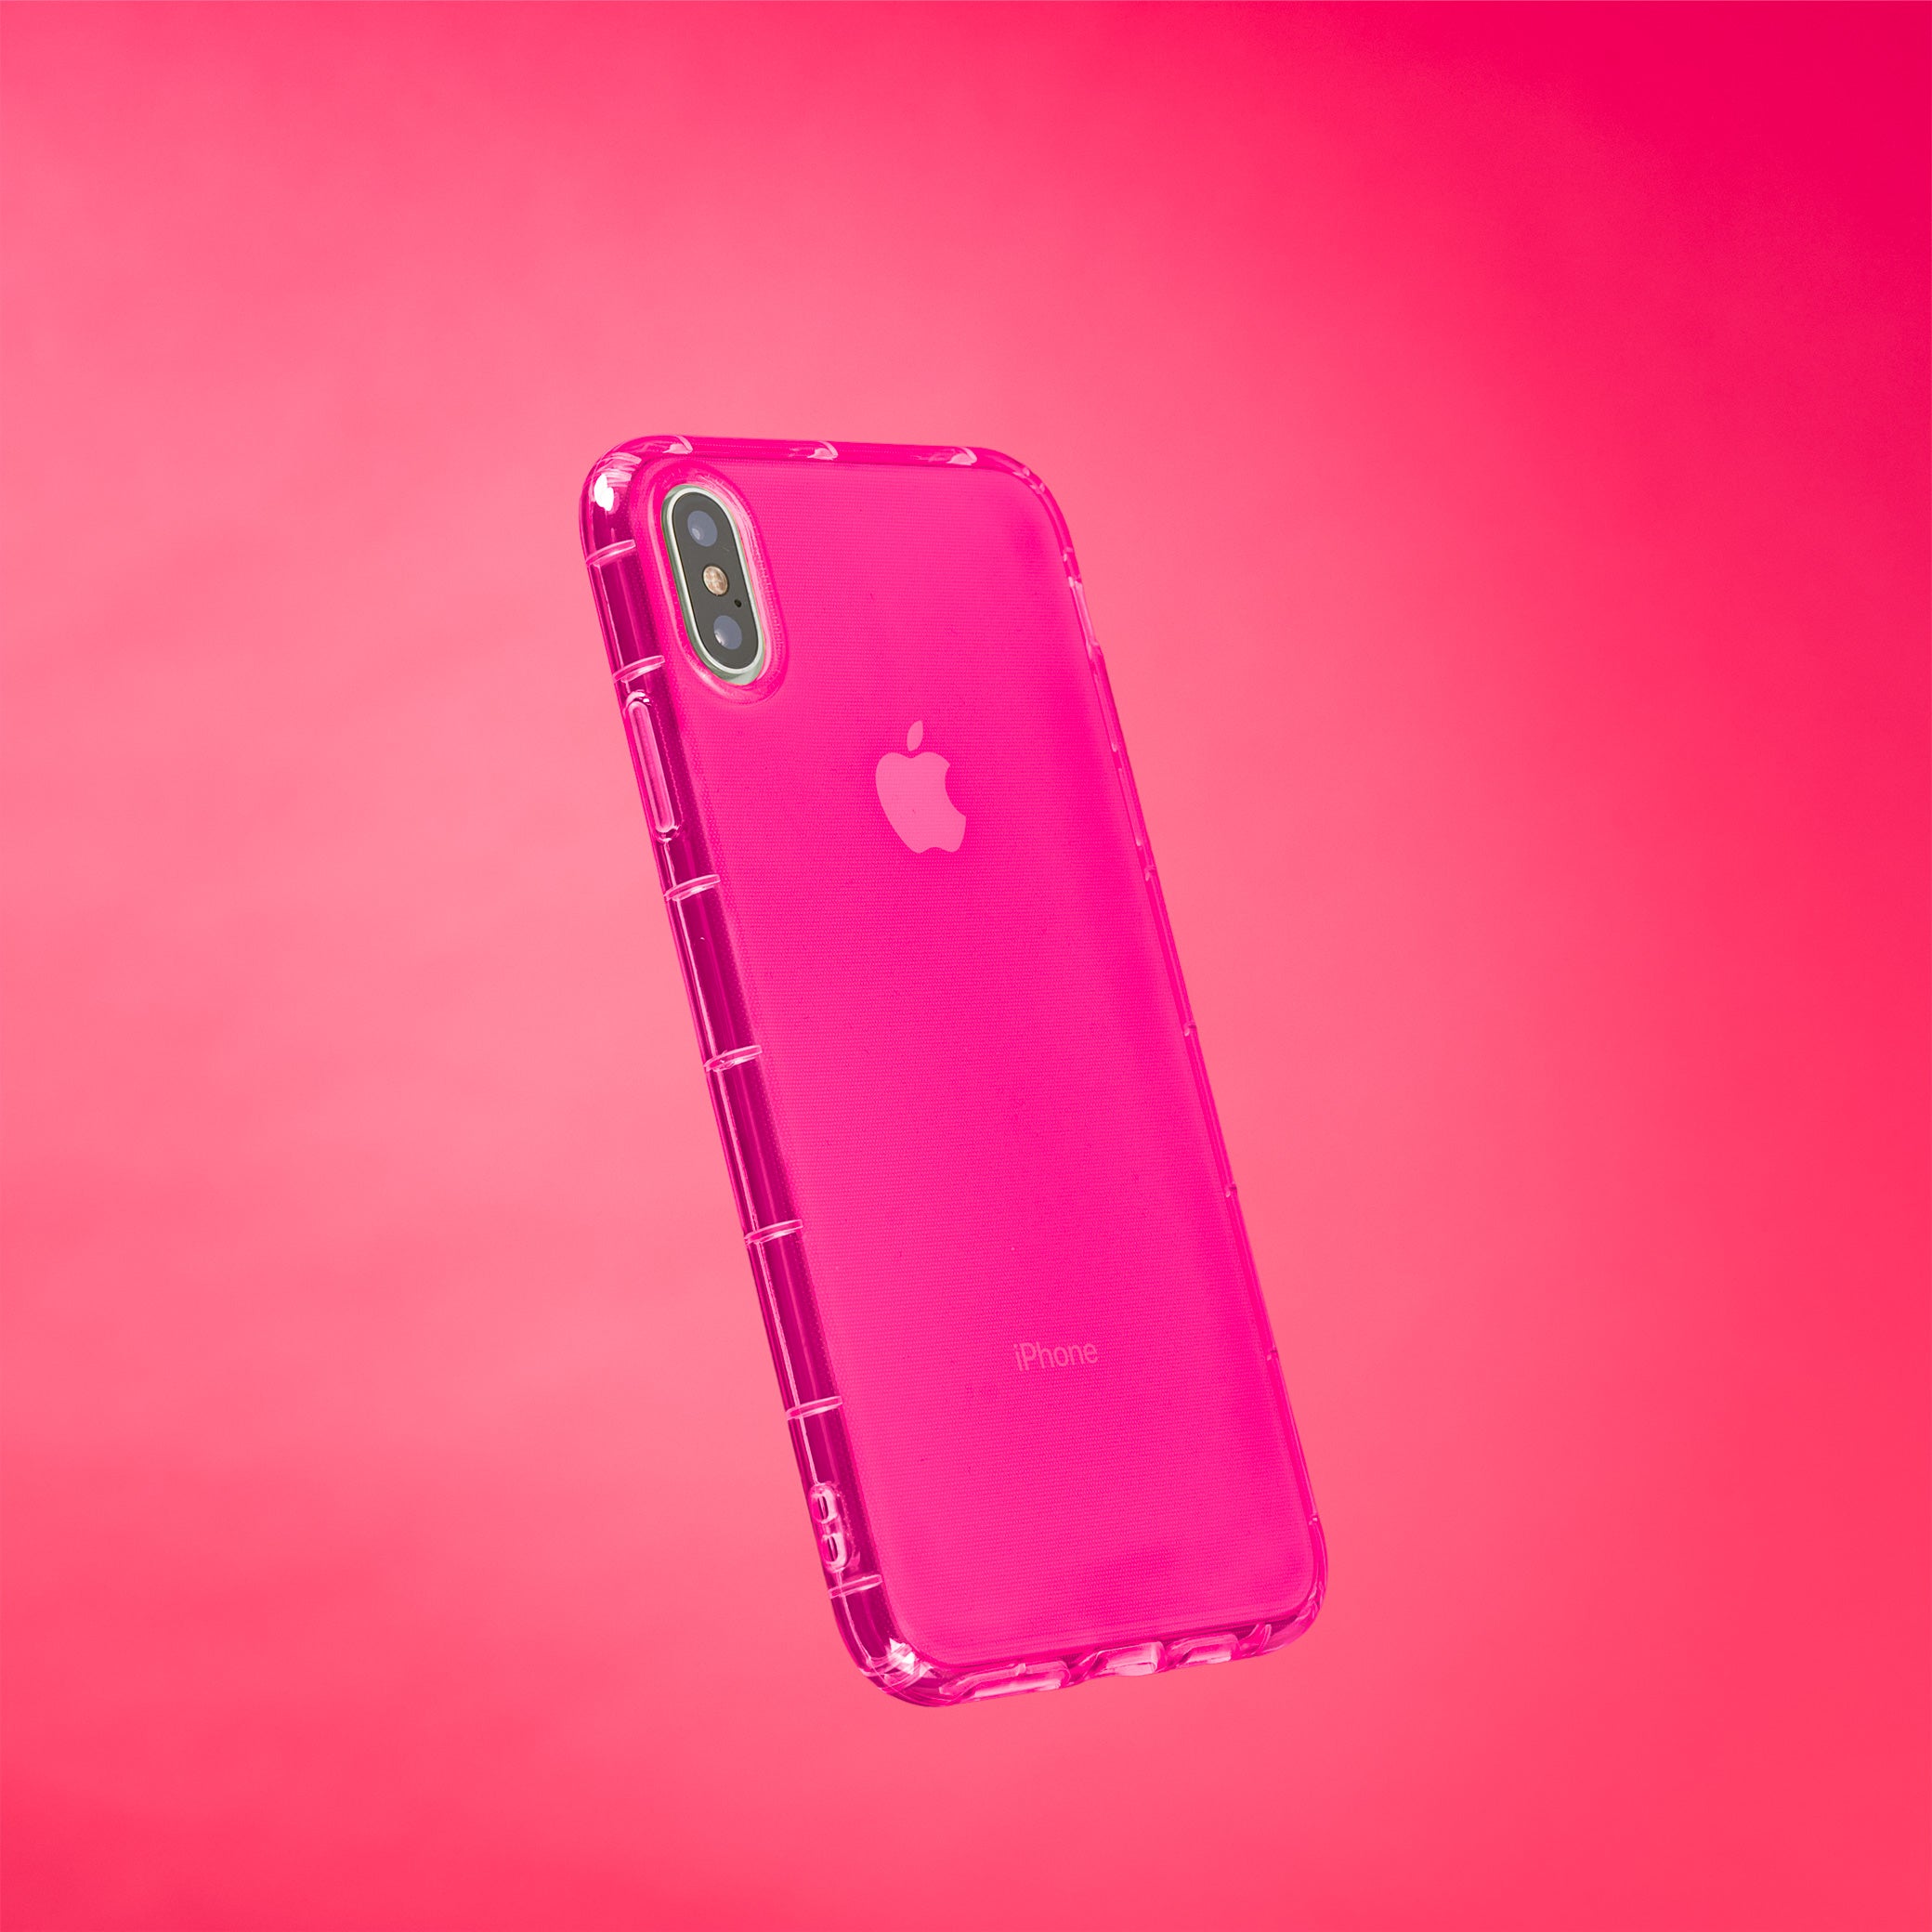 Highlighter Case for iPhone Xs Max - Eye-Catching Hot Pink